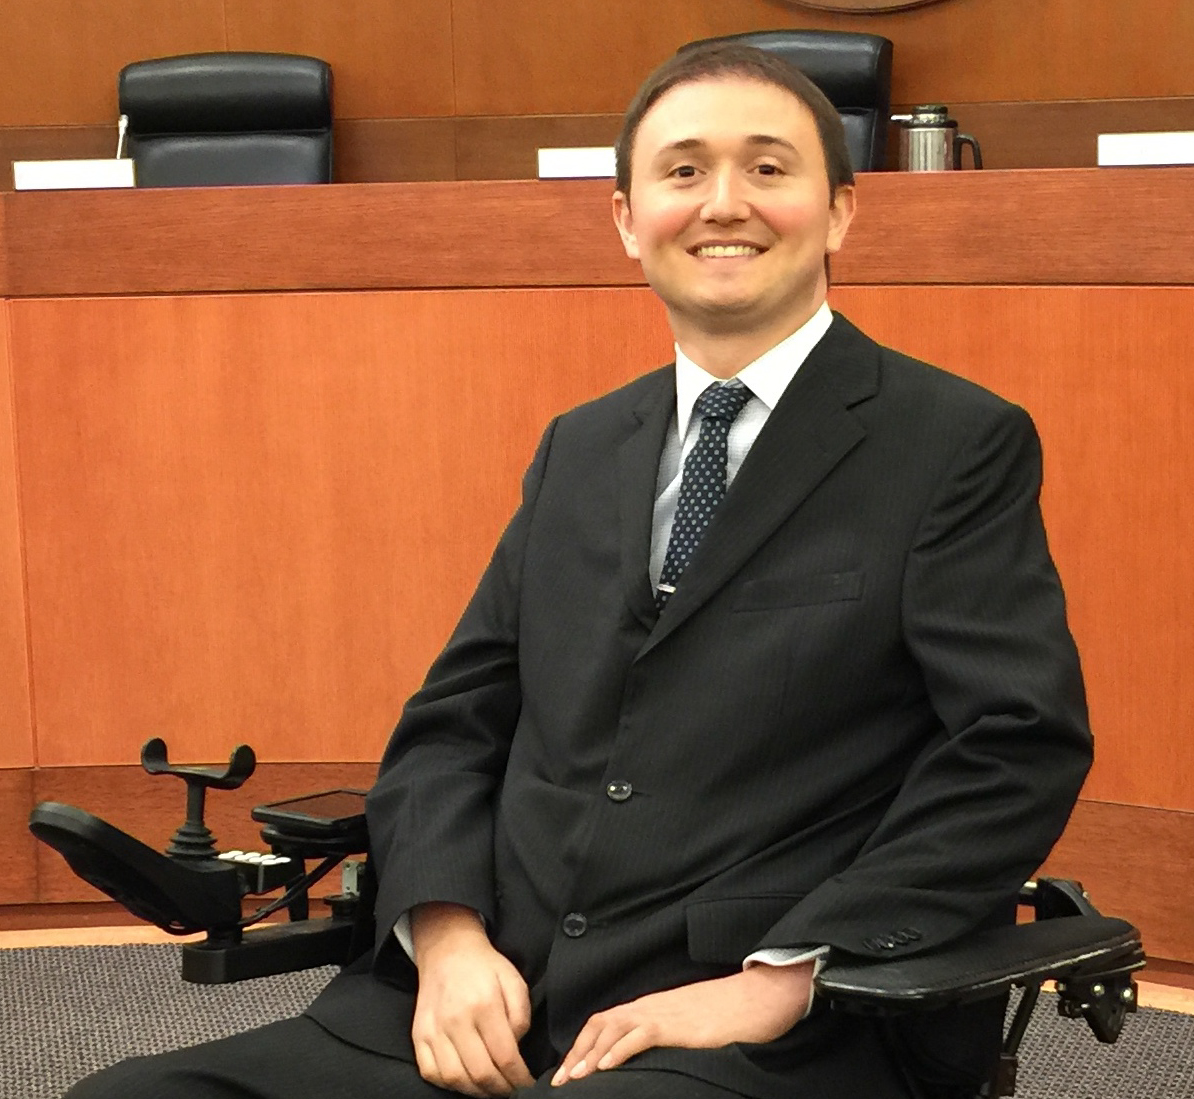 Josh Basile is a trial attorney in Maryland and Washington, D.C., and is passionate about all things SCI-related. After a C4-5 injury, he founded Determined2Heal and co-founded SPINALpedia.com. He is a board member of United Spinal Association and a tireless advocate for Medicaid reform.